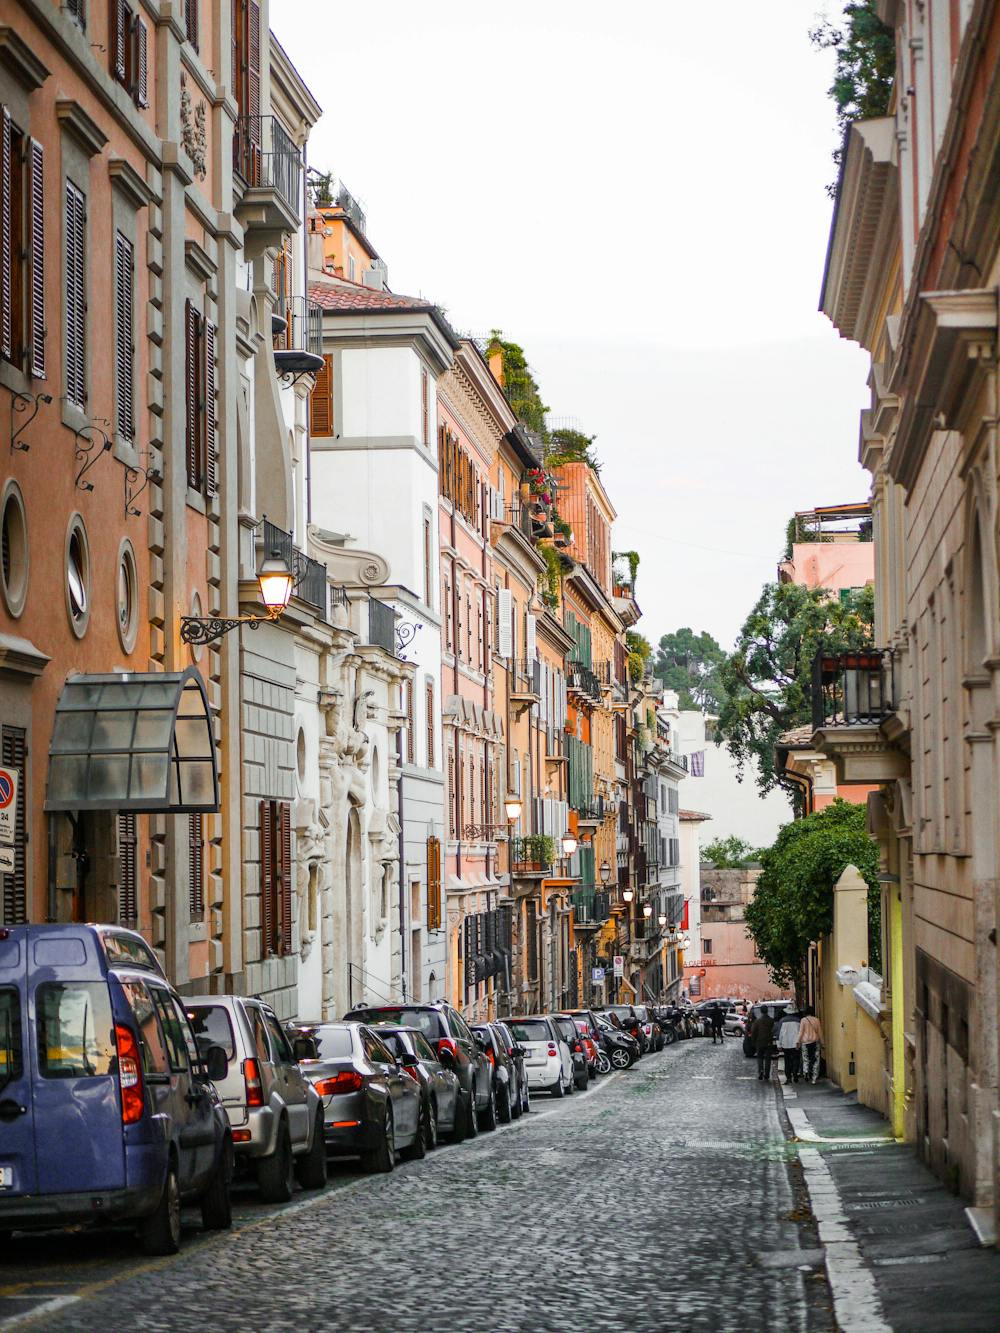 What are the costs of renting a car in Italy?